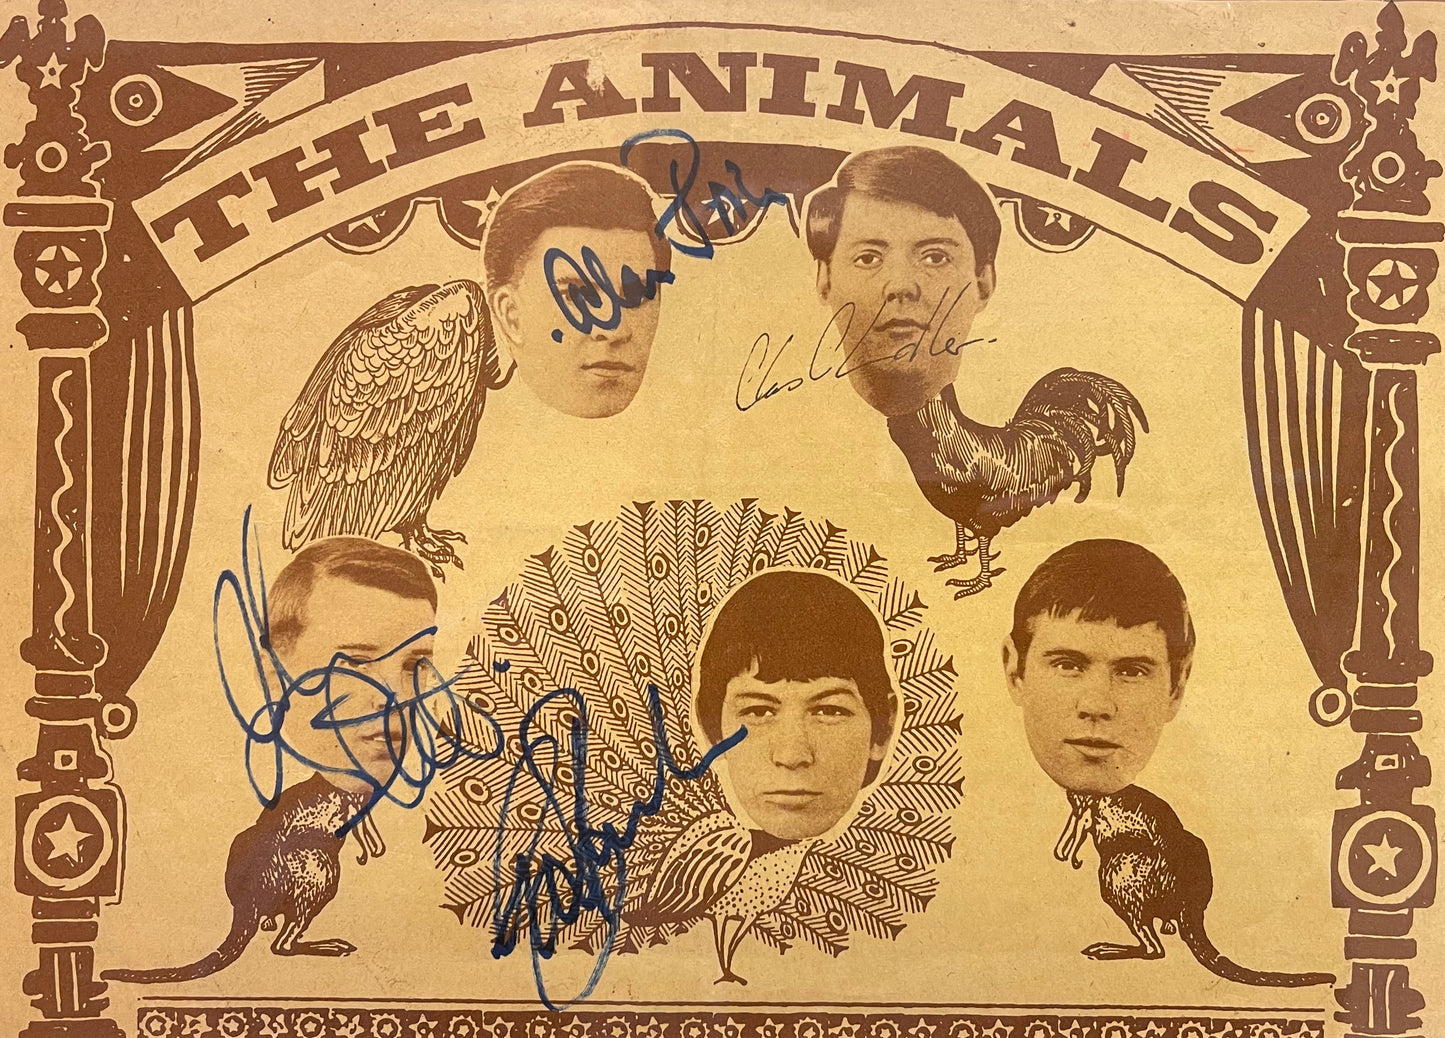 THE ANIMALS - BAND HAND SIGNED FRAMED PUBLICITY PHOTO AND COA